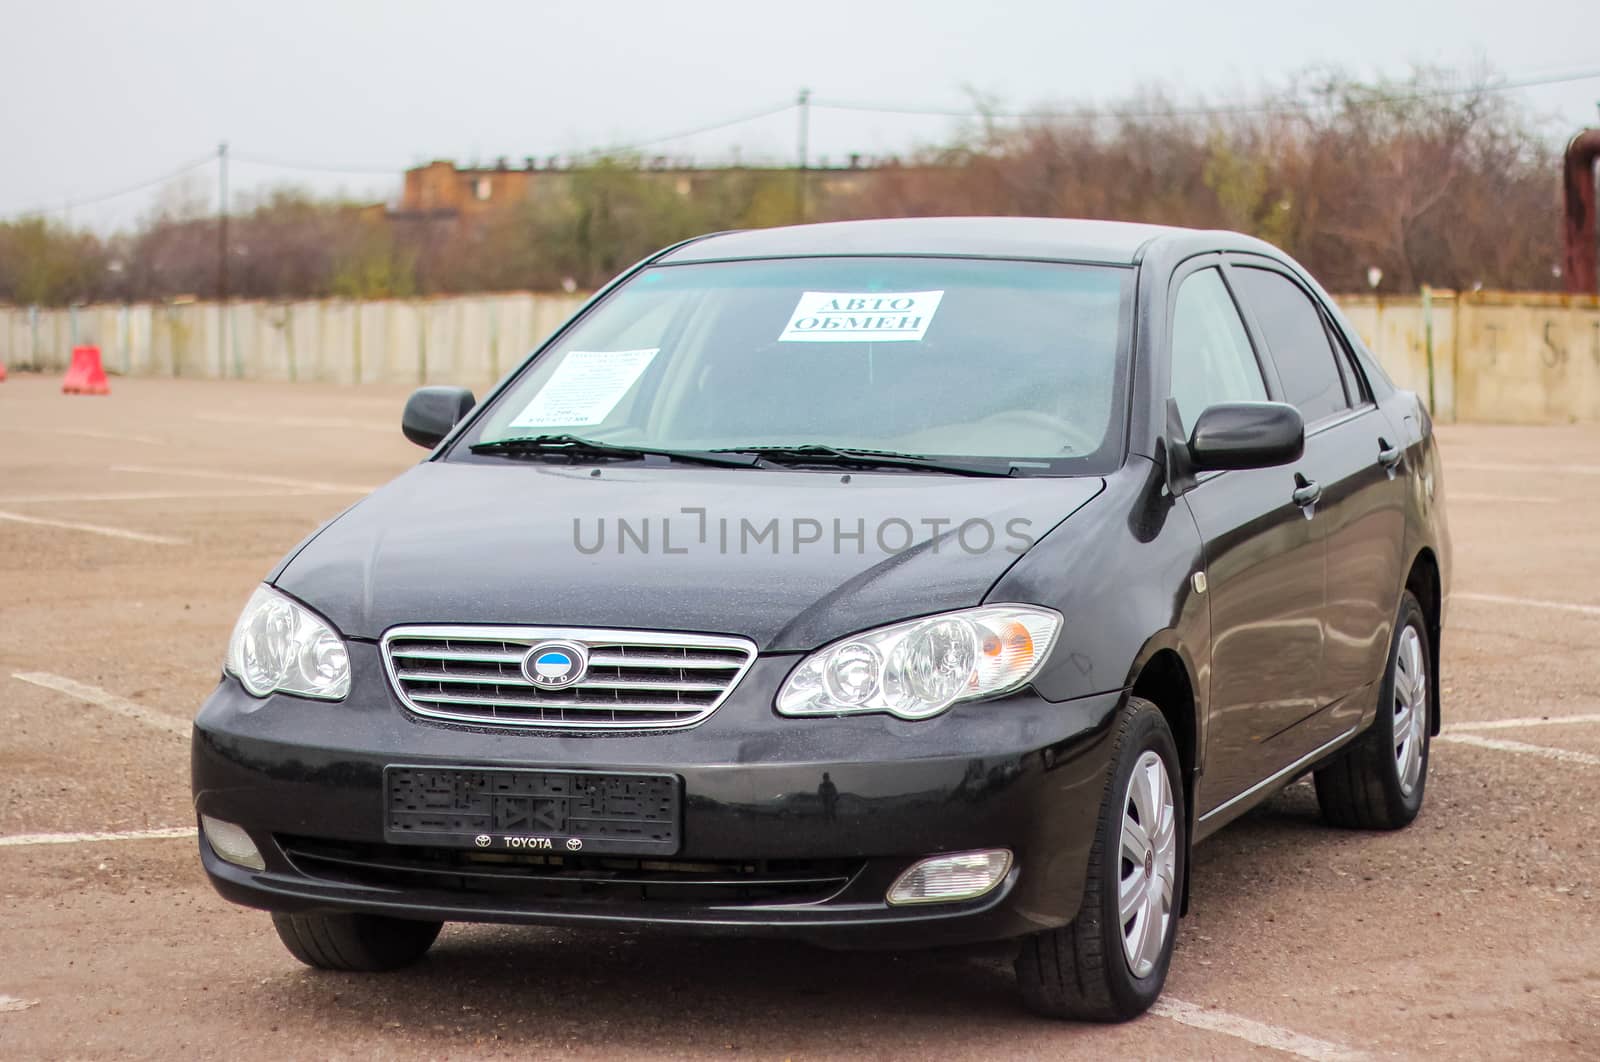 UFA, RUSSIA - APRIL 19, 2012: Motor car BYD F3 at the used cars trade center.